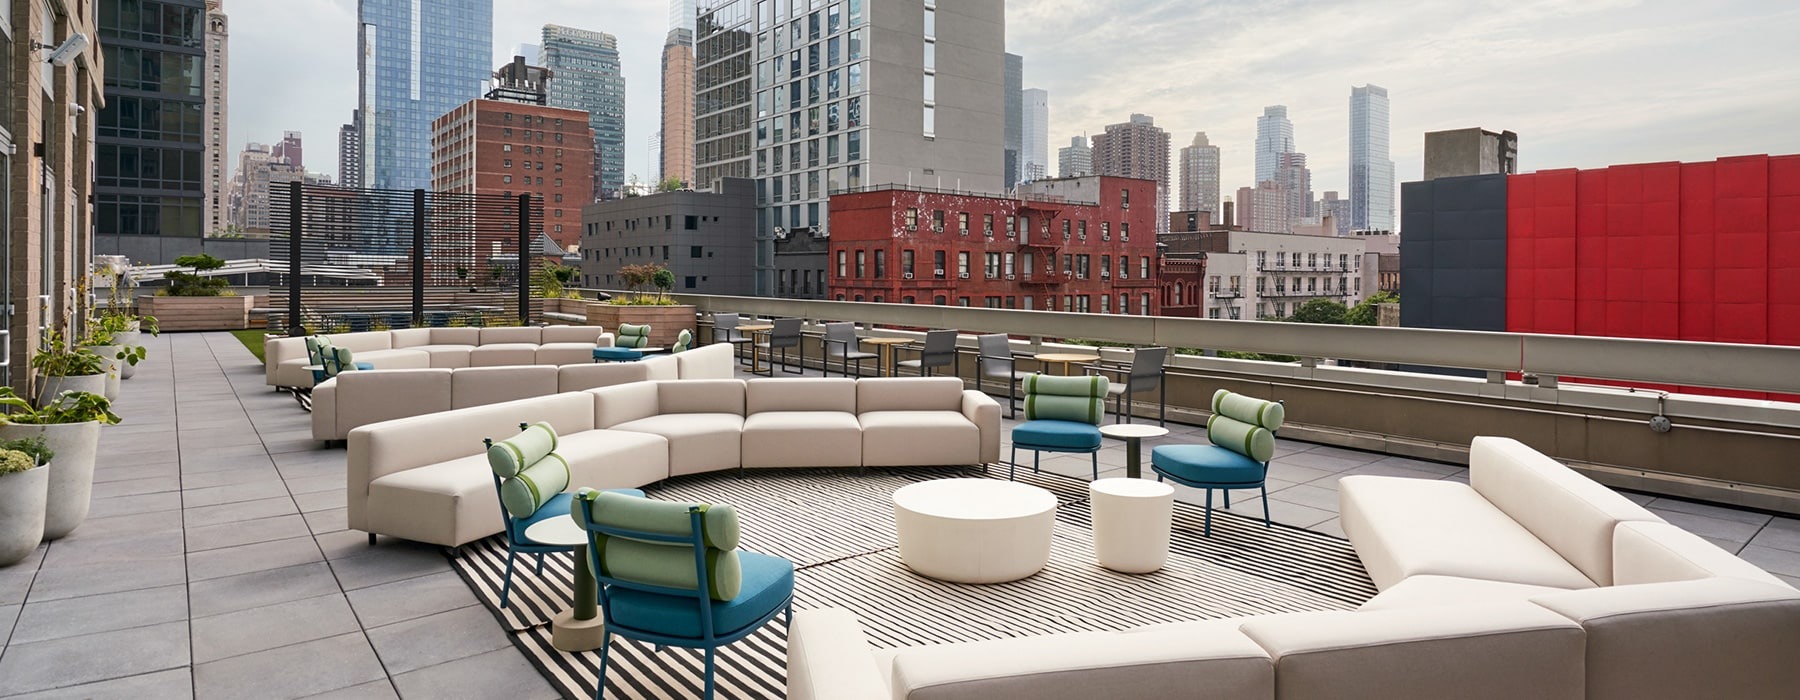 rooftop terrace area with views of downtown and with ample seating